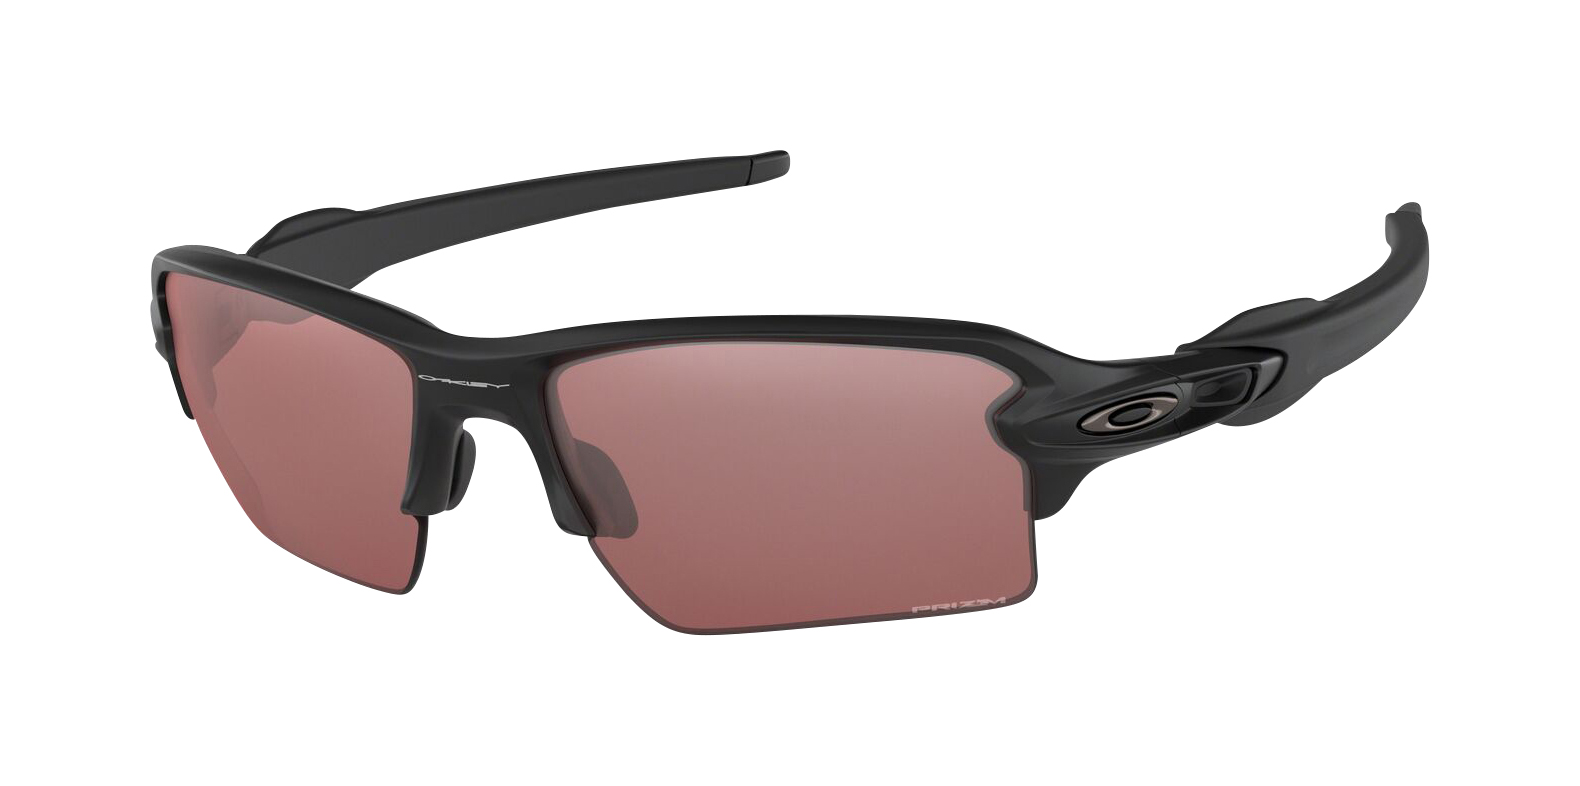 Oakley FLAK 2.0 XL 9188 image number null